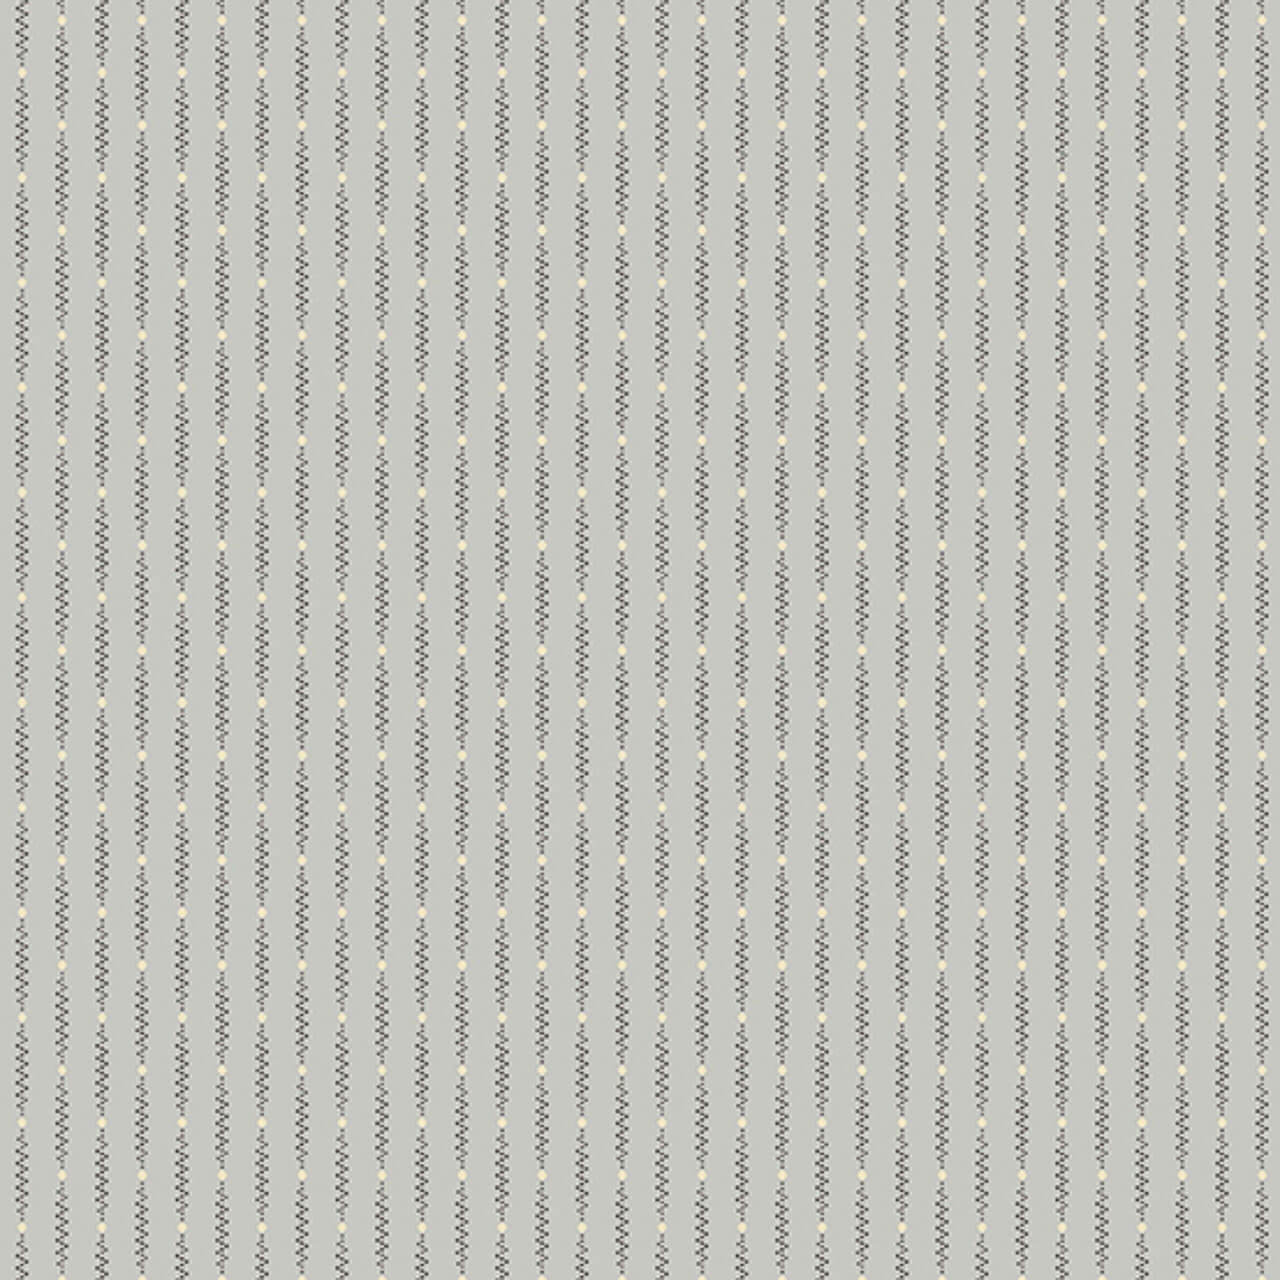 Close-up of Dot Zipper in Silver fabric from Andover's Jewel Box Collection, showcasing detailed grey ditsy prints on 100% cotton material